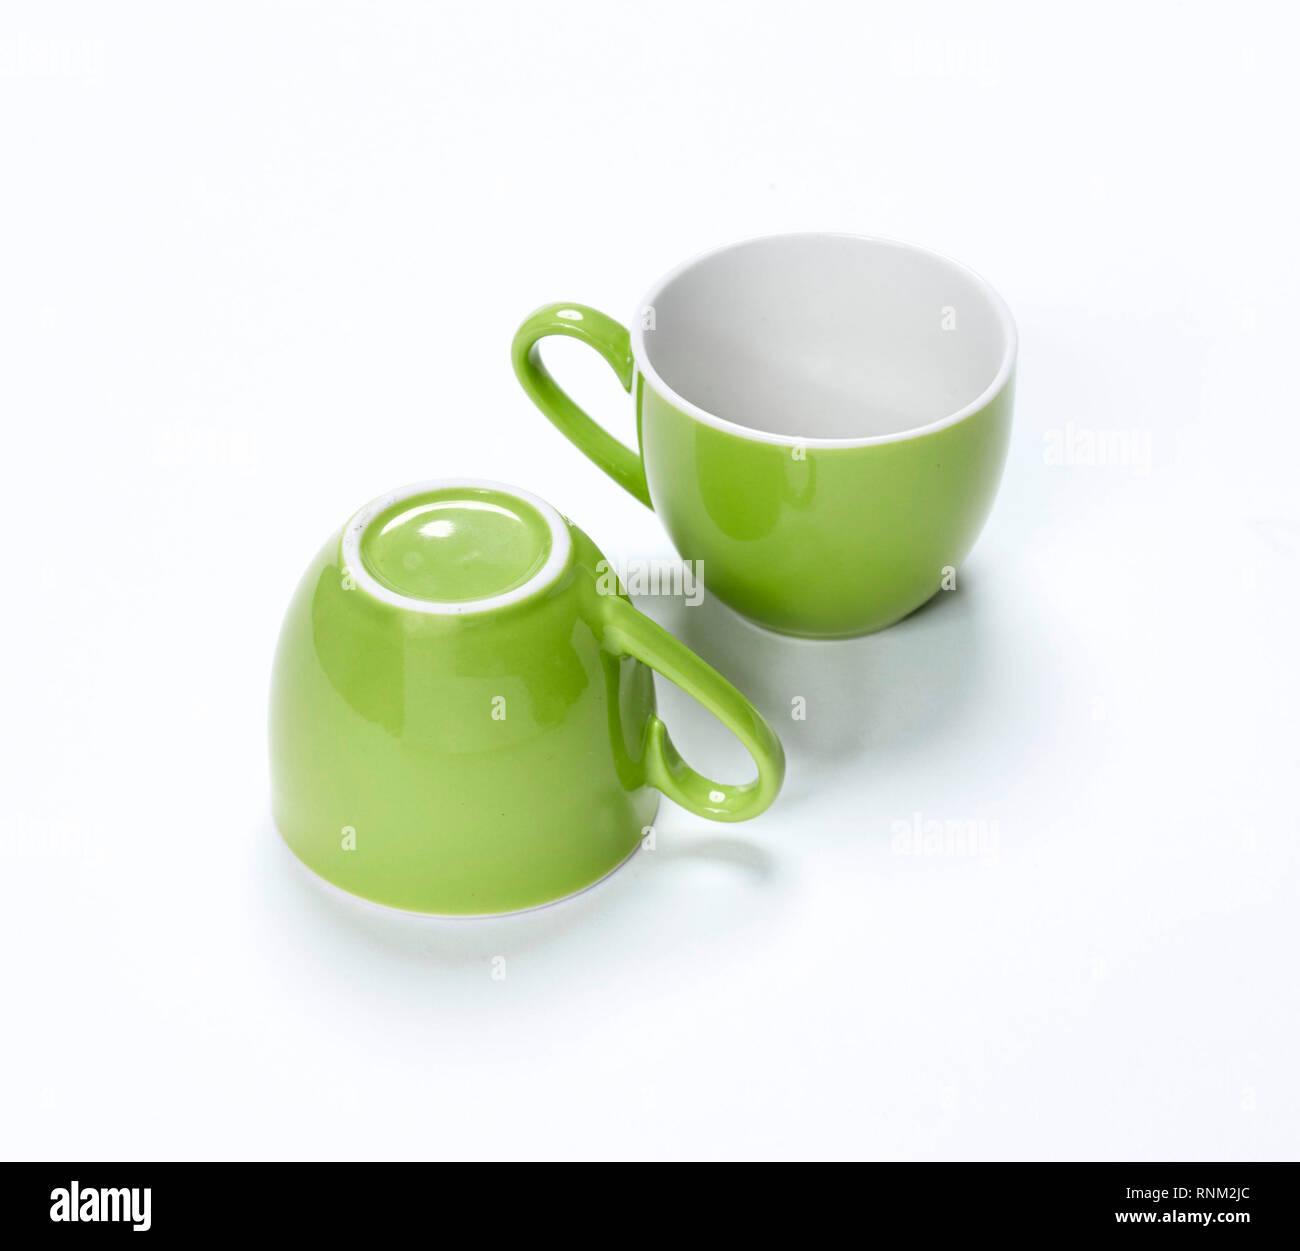 Two green espresso cups. Studio picture against a white background Stock Photo